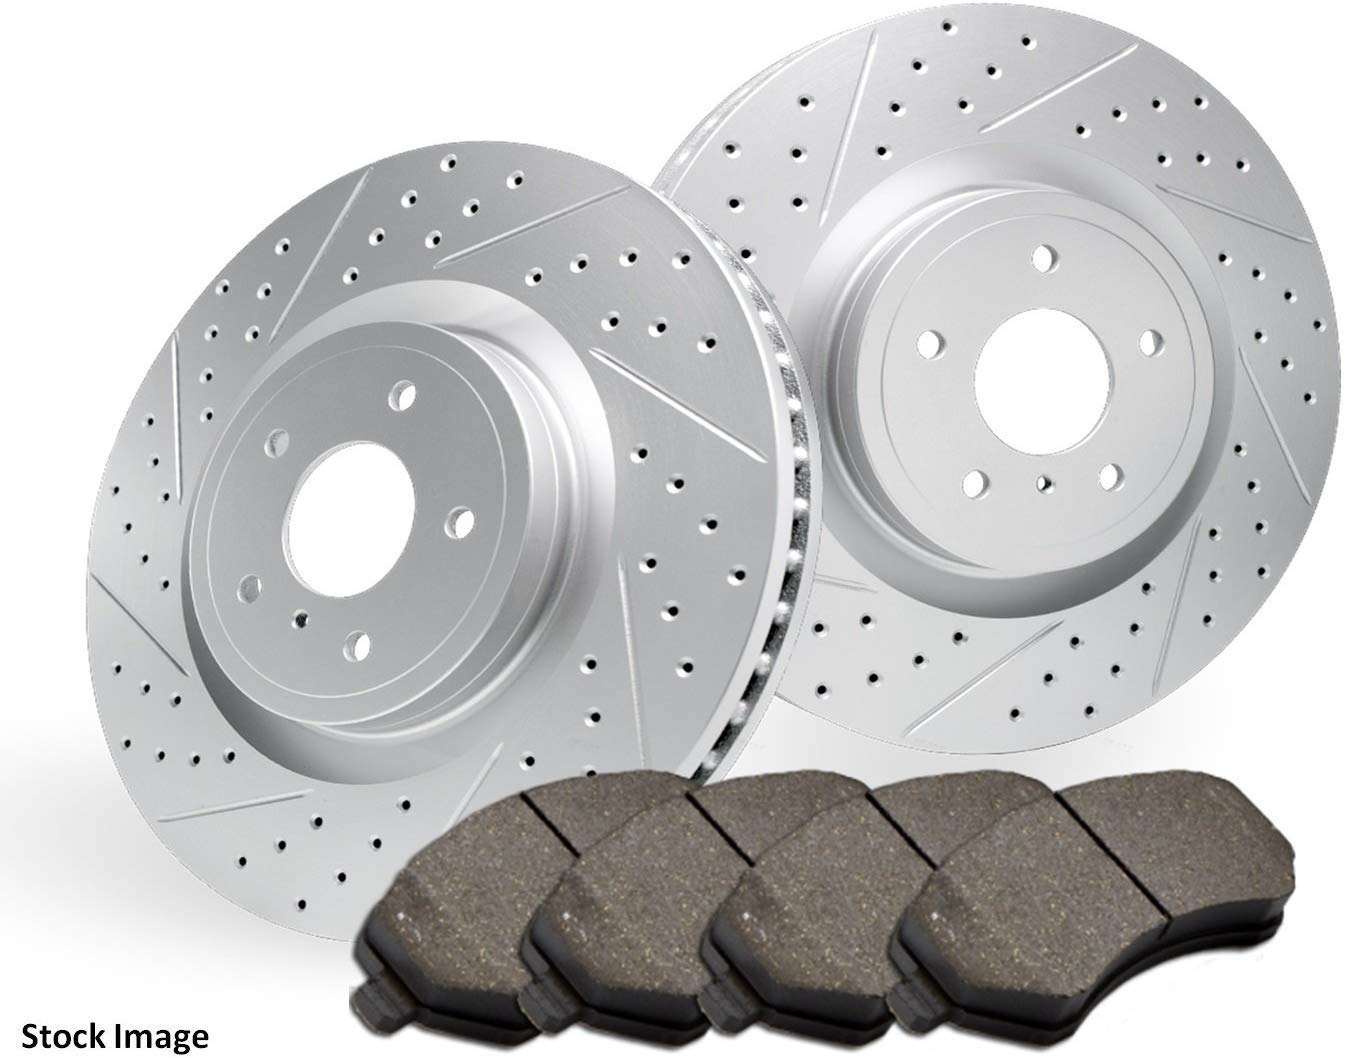 2017 for Hyundai Tucson (NOTE: GAS) Rear Premium Quality Cross Drilled and Slotted Coated Disc Brake Rotors And Ceramic Brake Pads - (For Both Left and Right) One Year Warranty